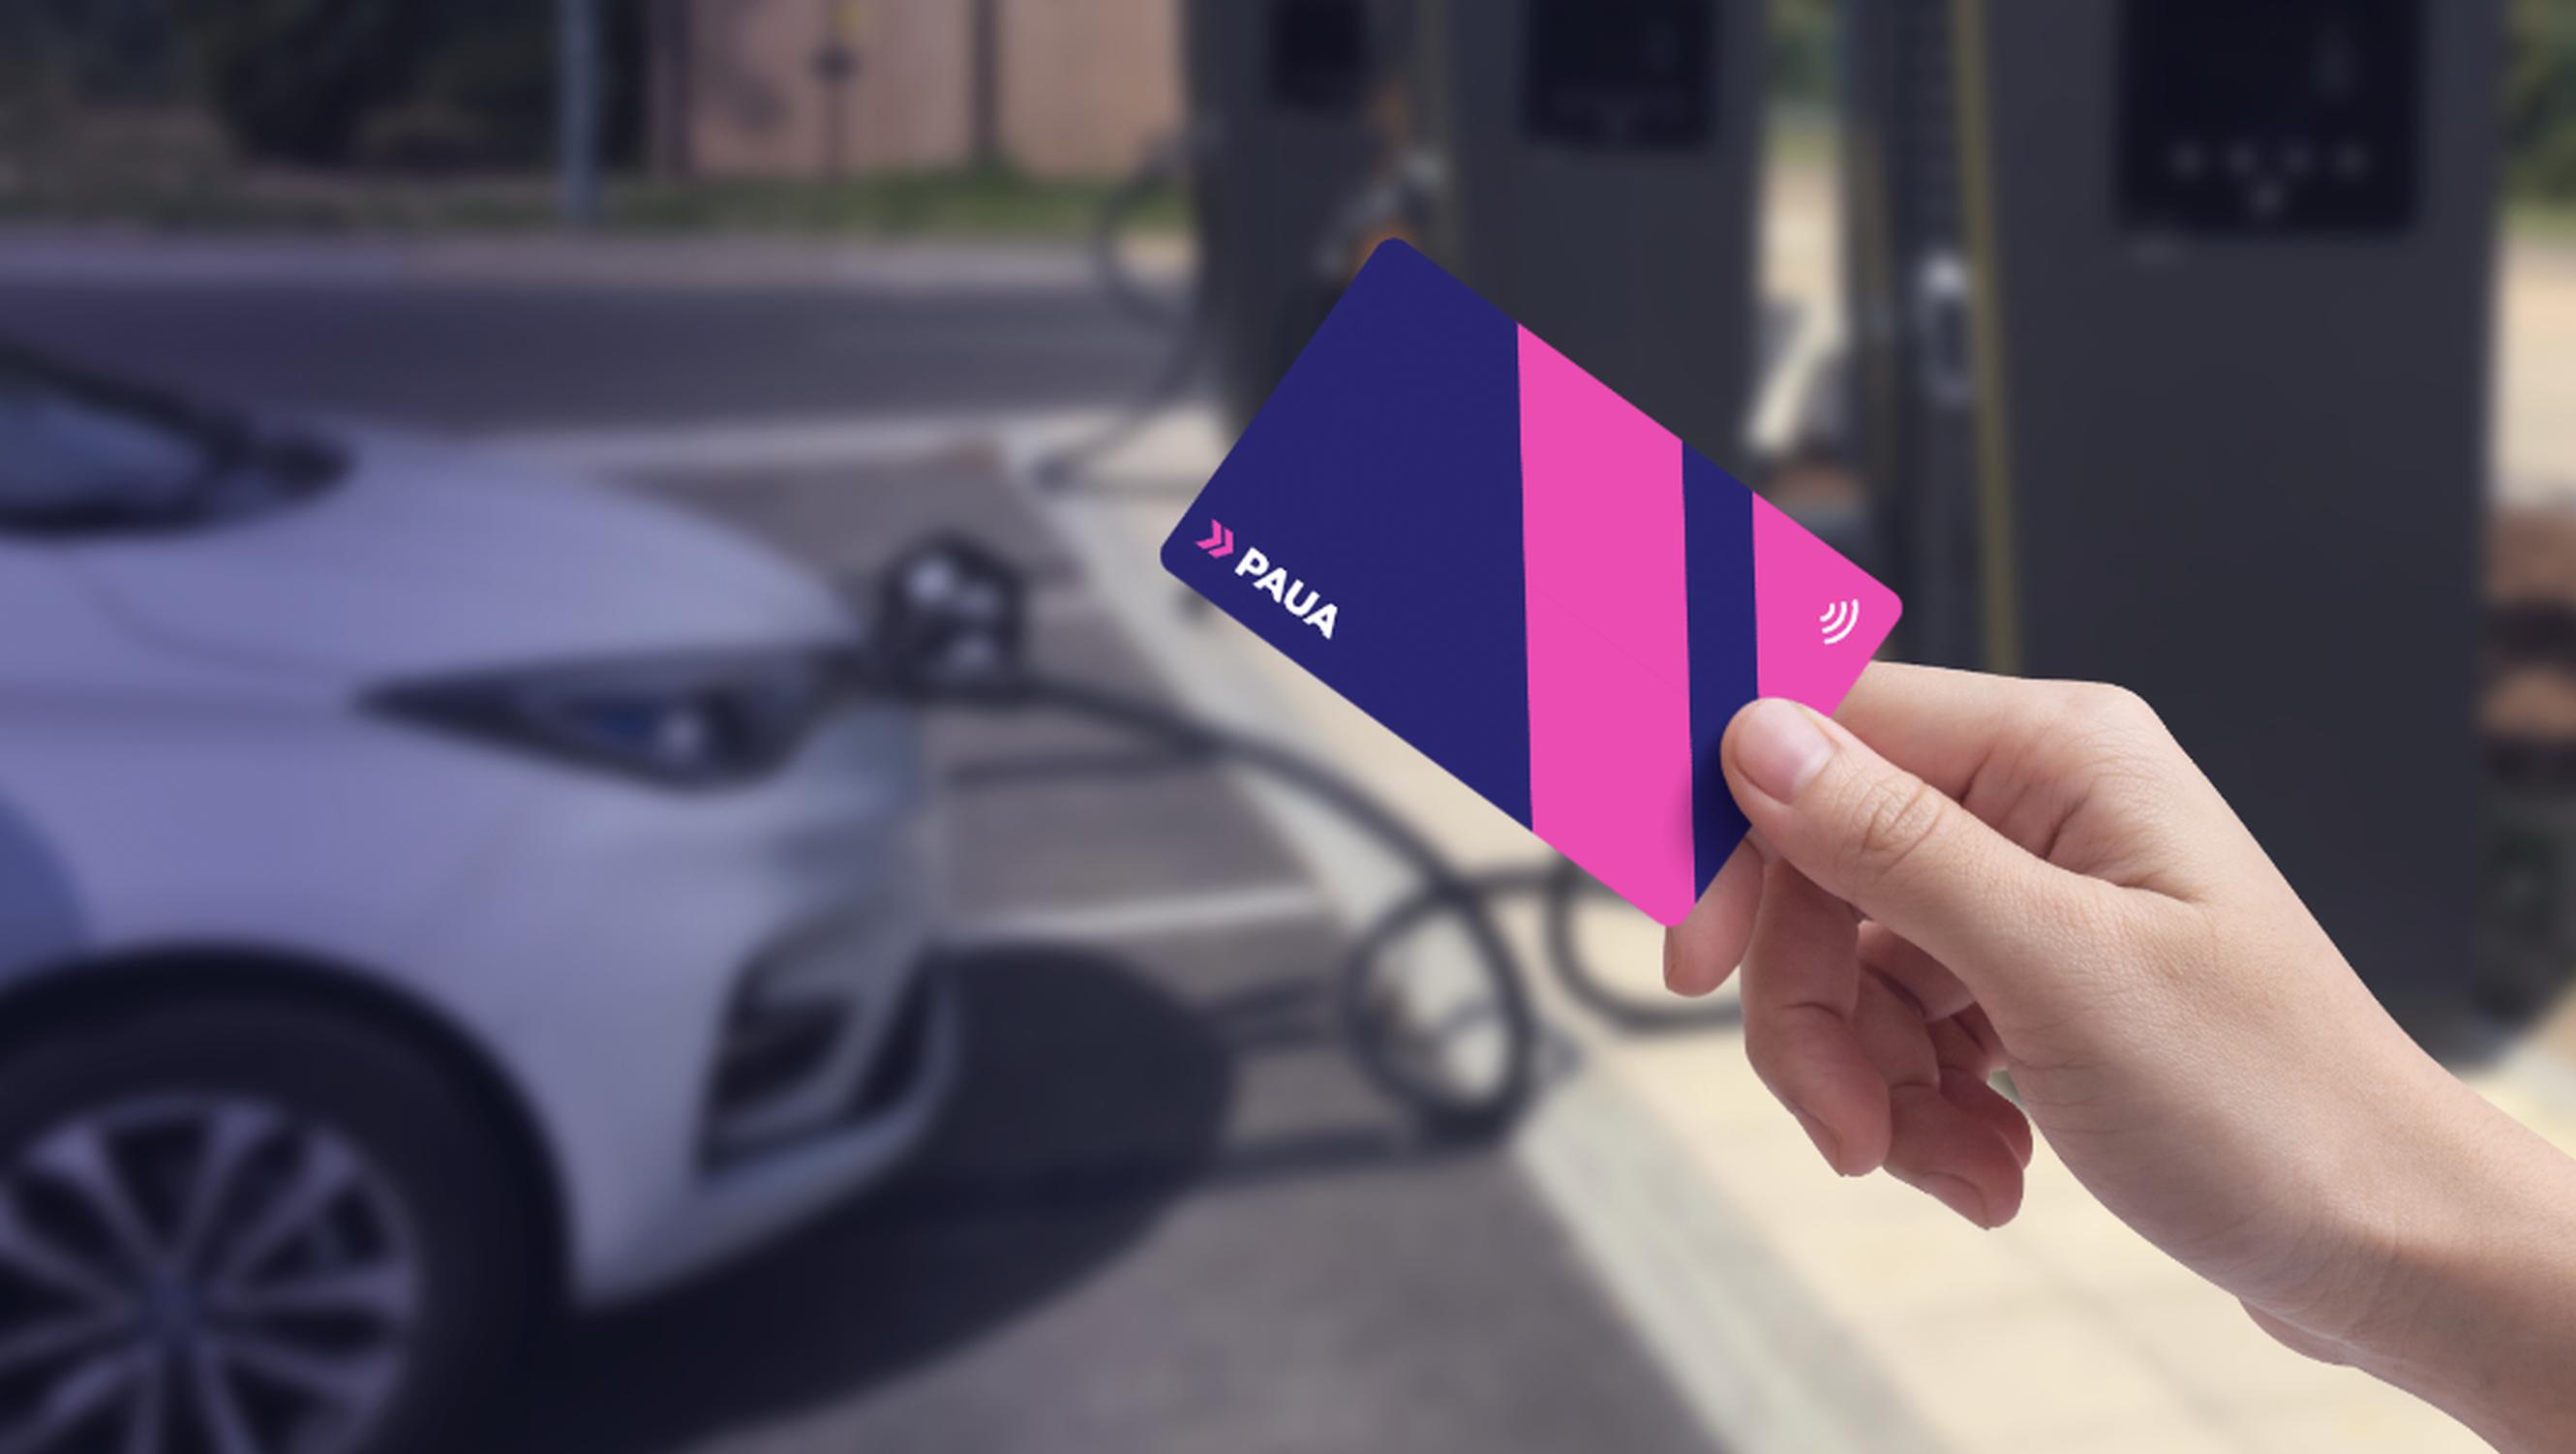 Paua offers businesses an EV charge card, mobile app with live data and a single bill